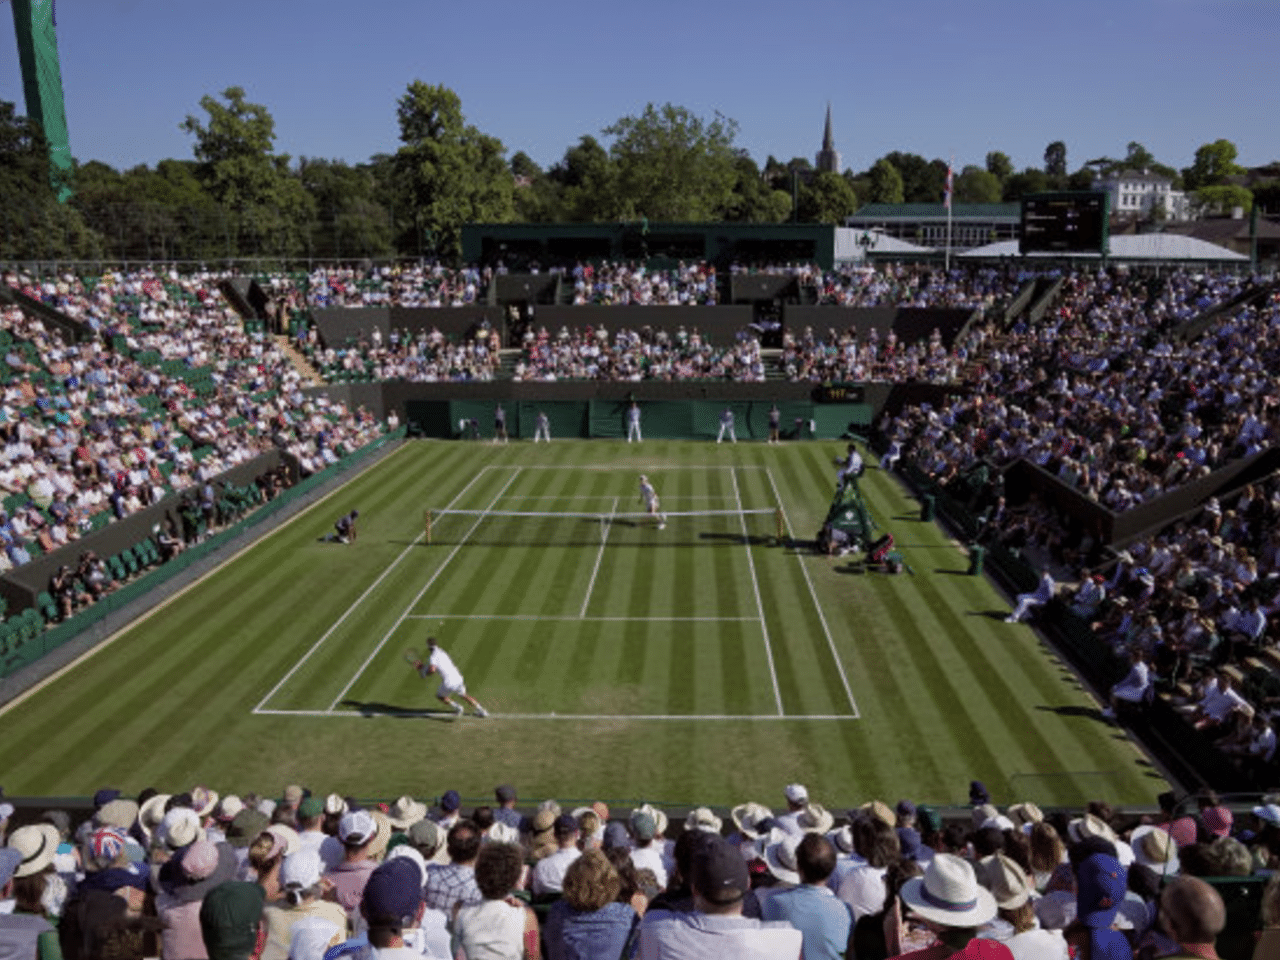 London's Top Sporting Venues: A Must-See for Sports Enthusiasts